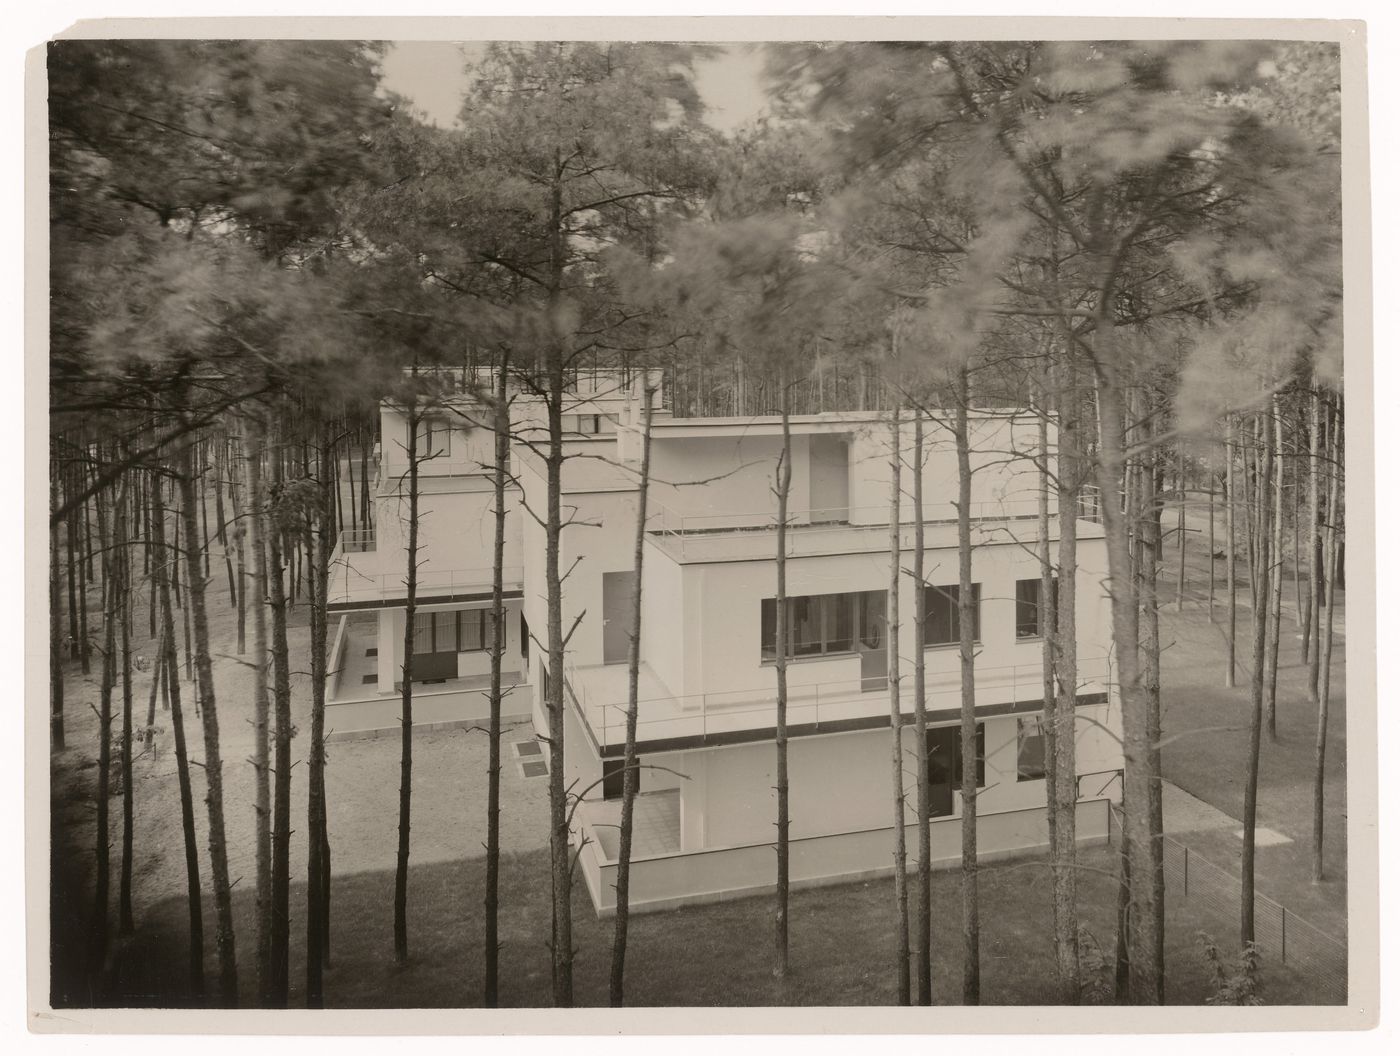 View of the west façade of a double house, Bauhaus Masters' Housing, Dessau, Germany